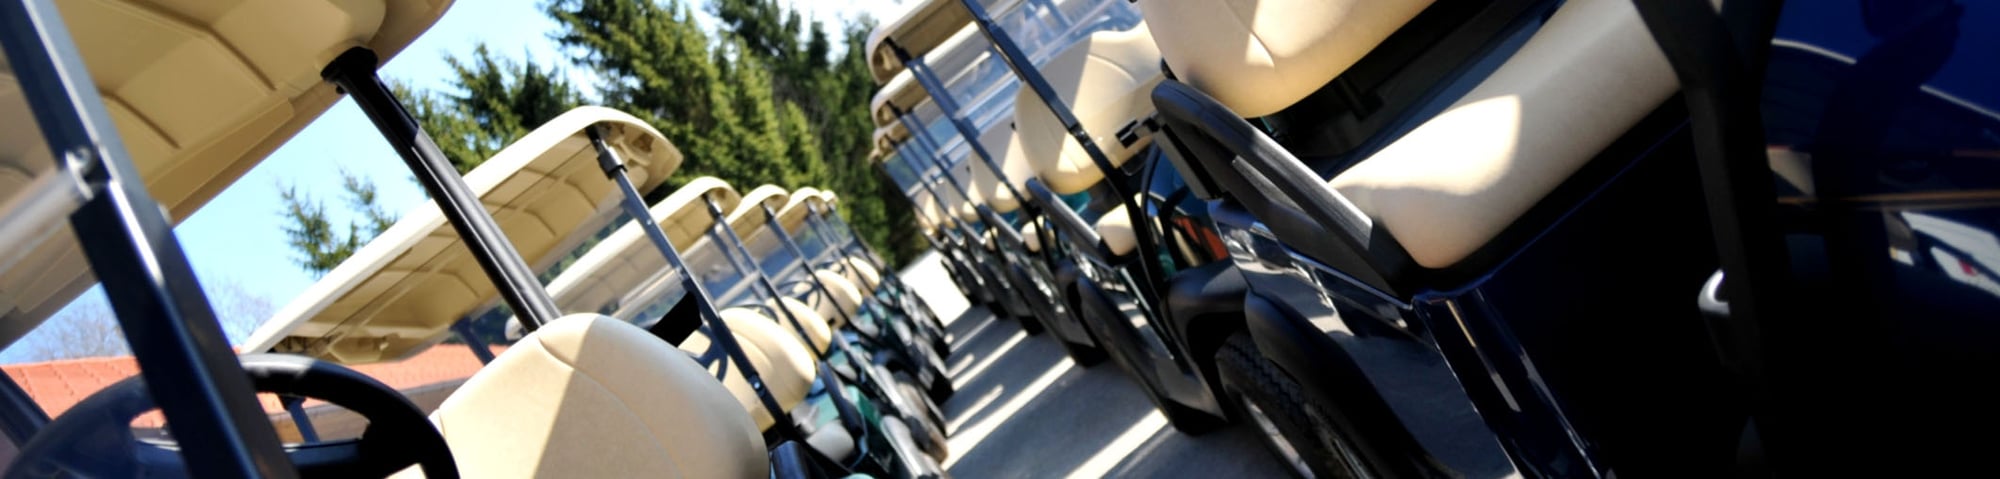 Golf carts for multifamily property management